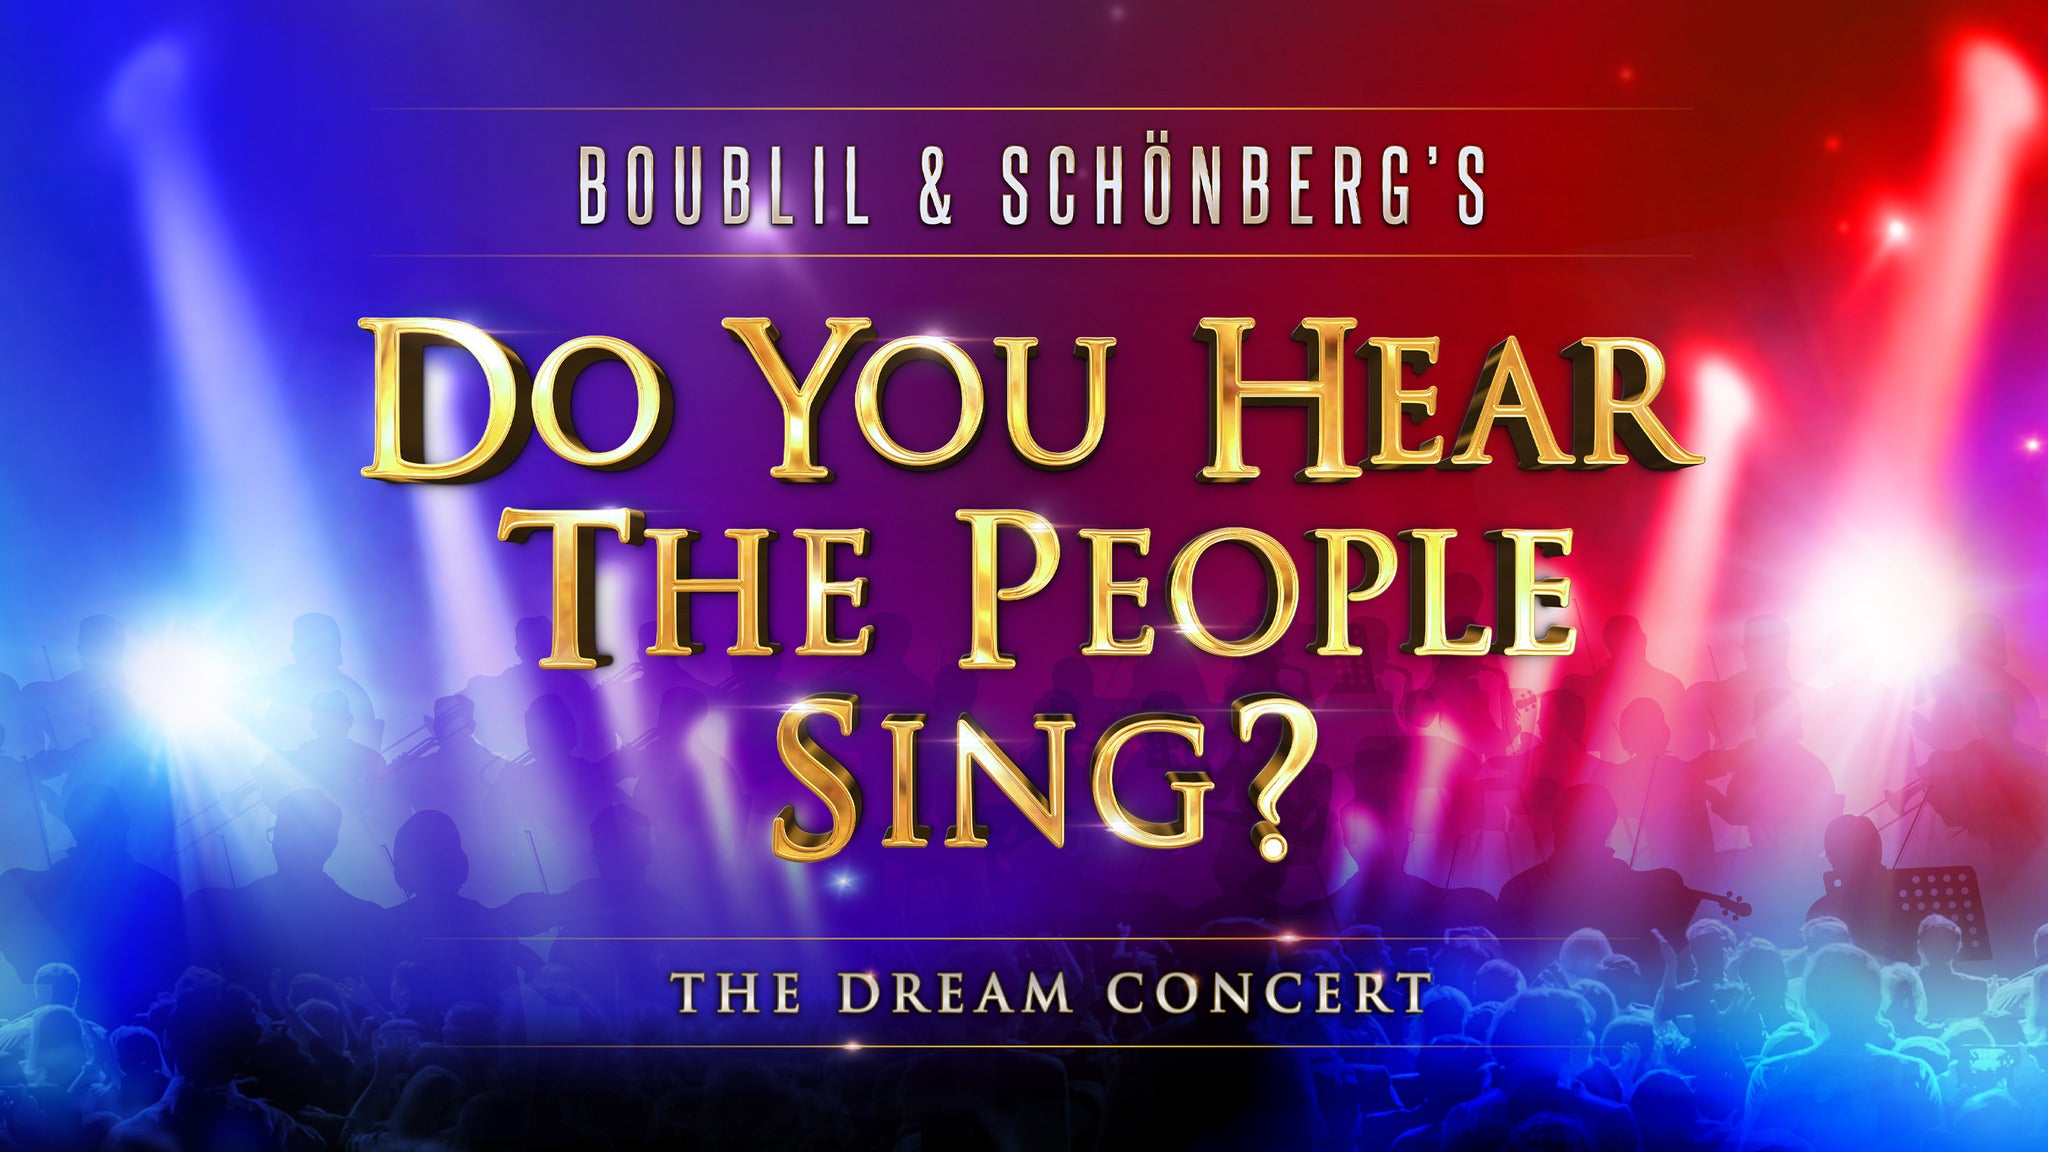 Do You Hear The People Sing?